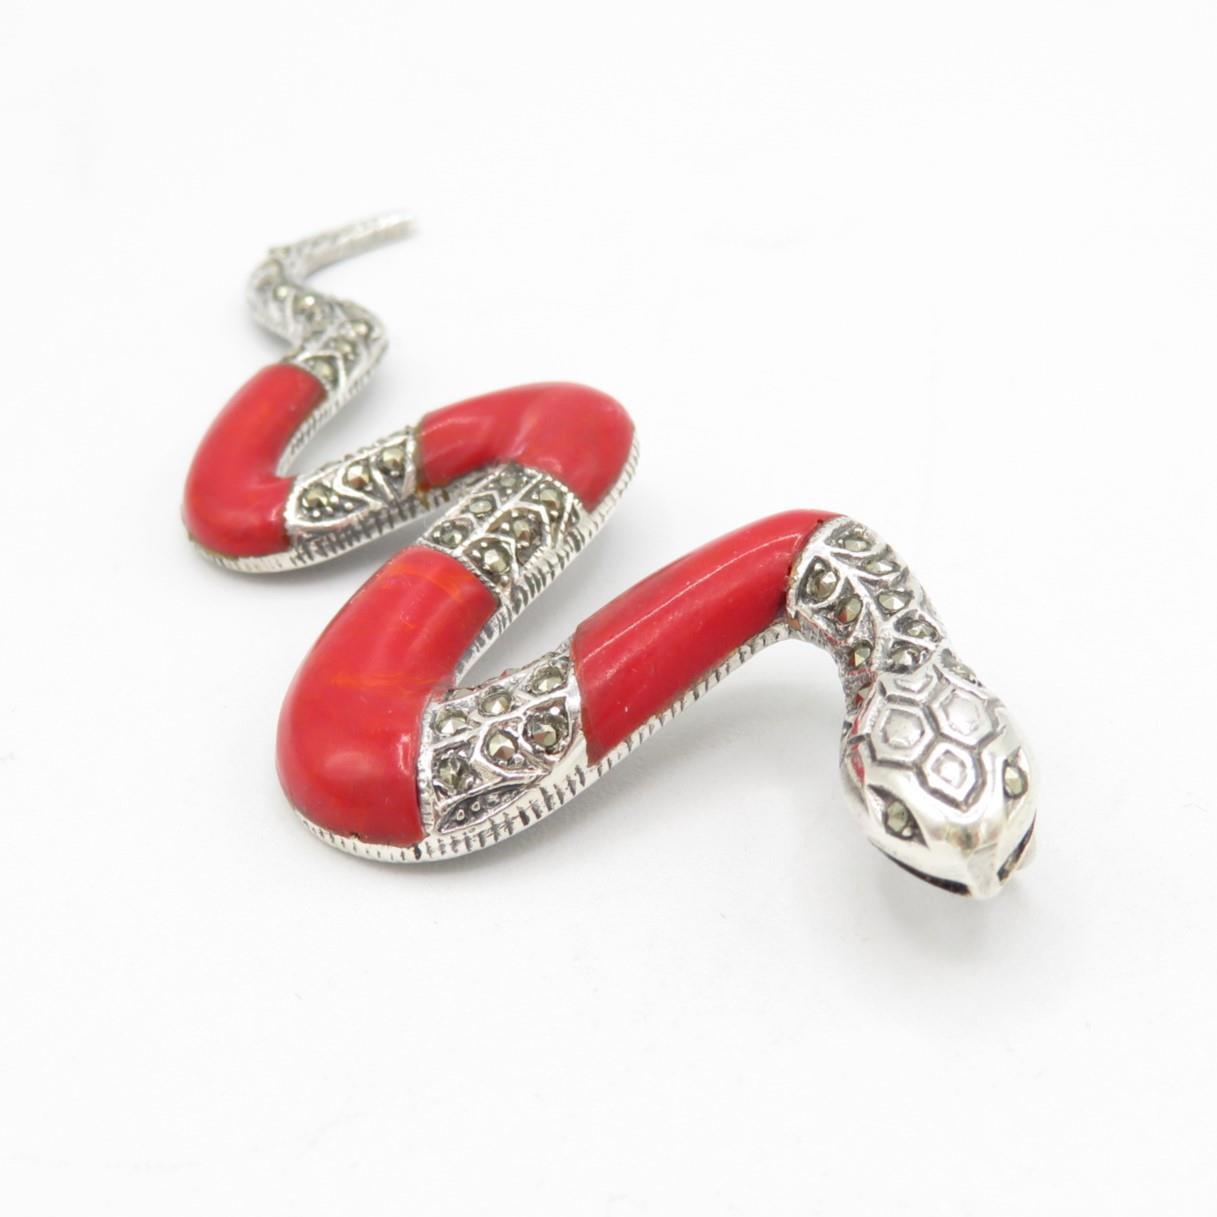 HM Sterling Silver 925 Snake pendant set with red stones and stone eyes (10.6g) In excellent - Image 2 of 6